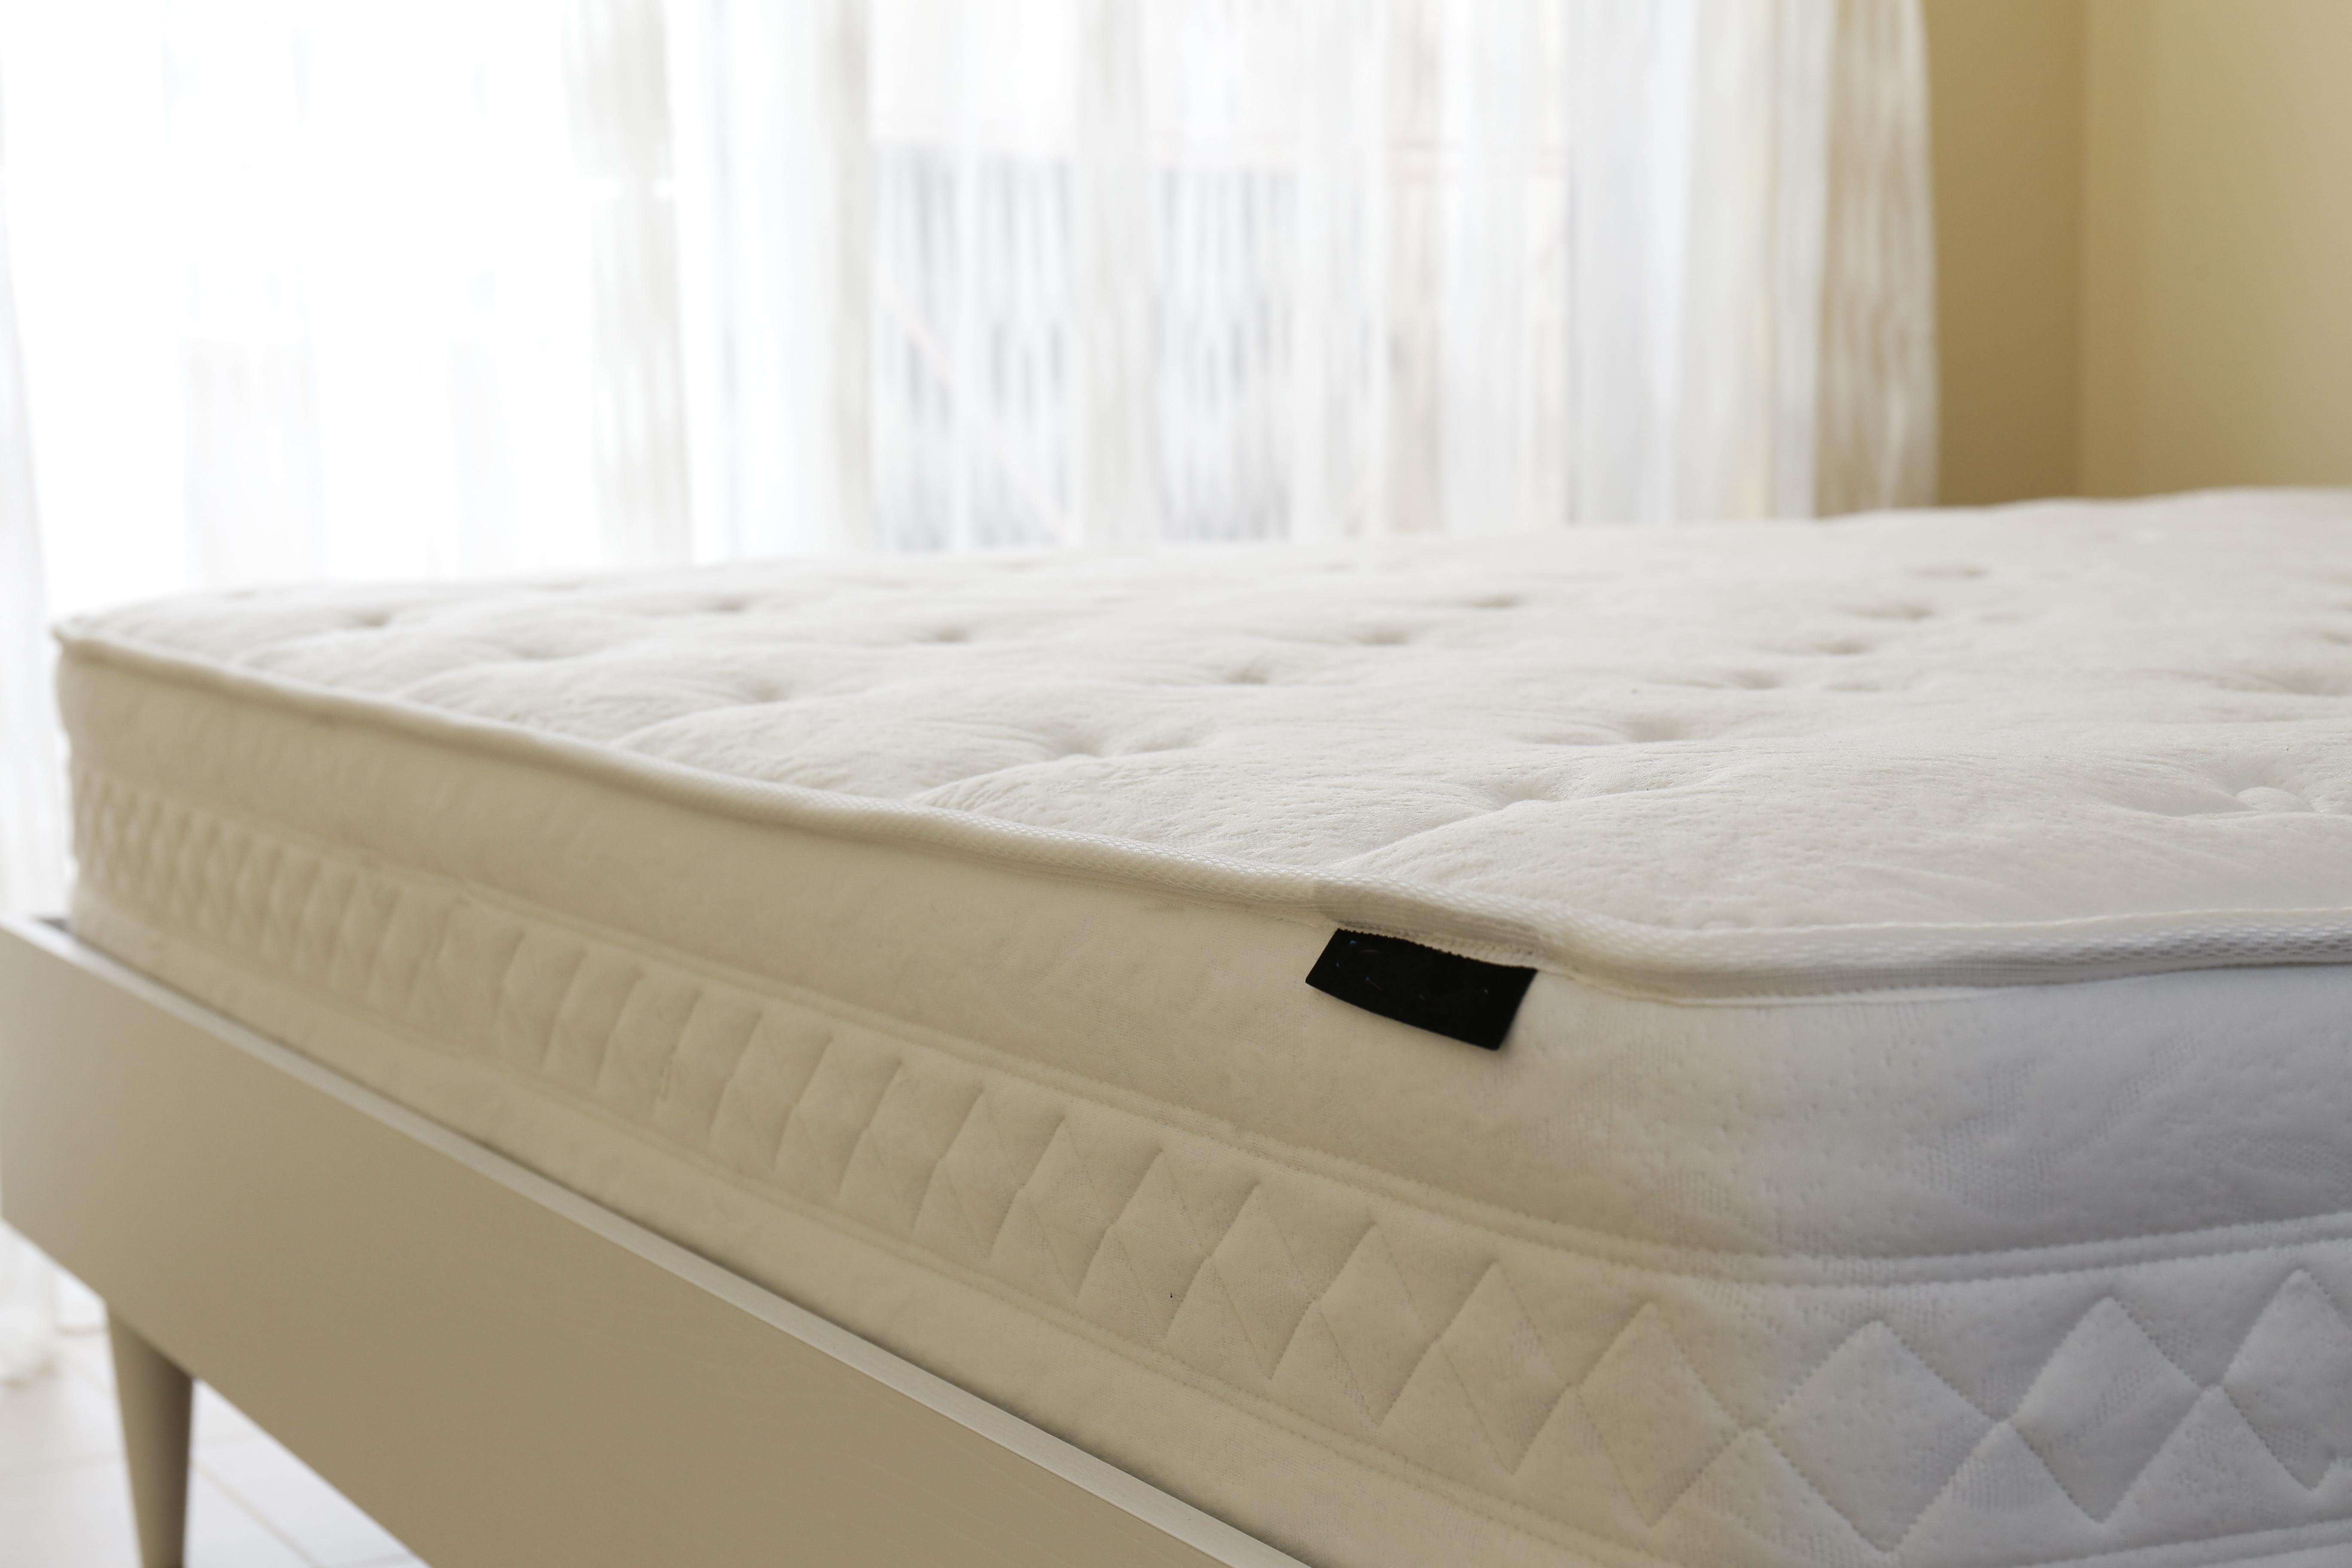 Reasons You Might Need To Dry A Mattress